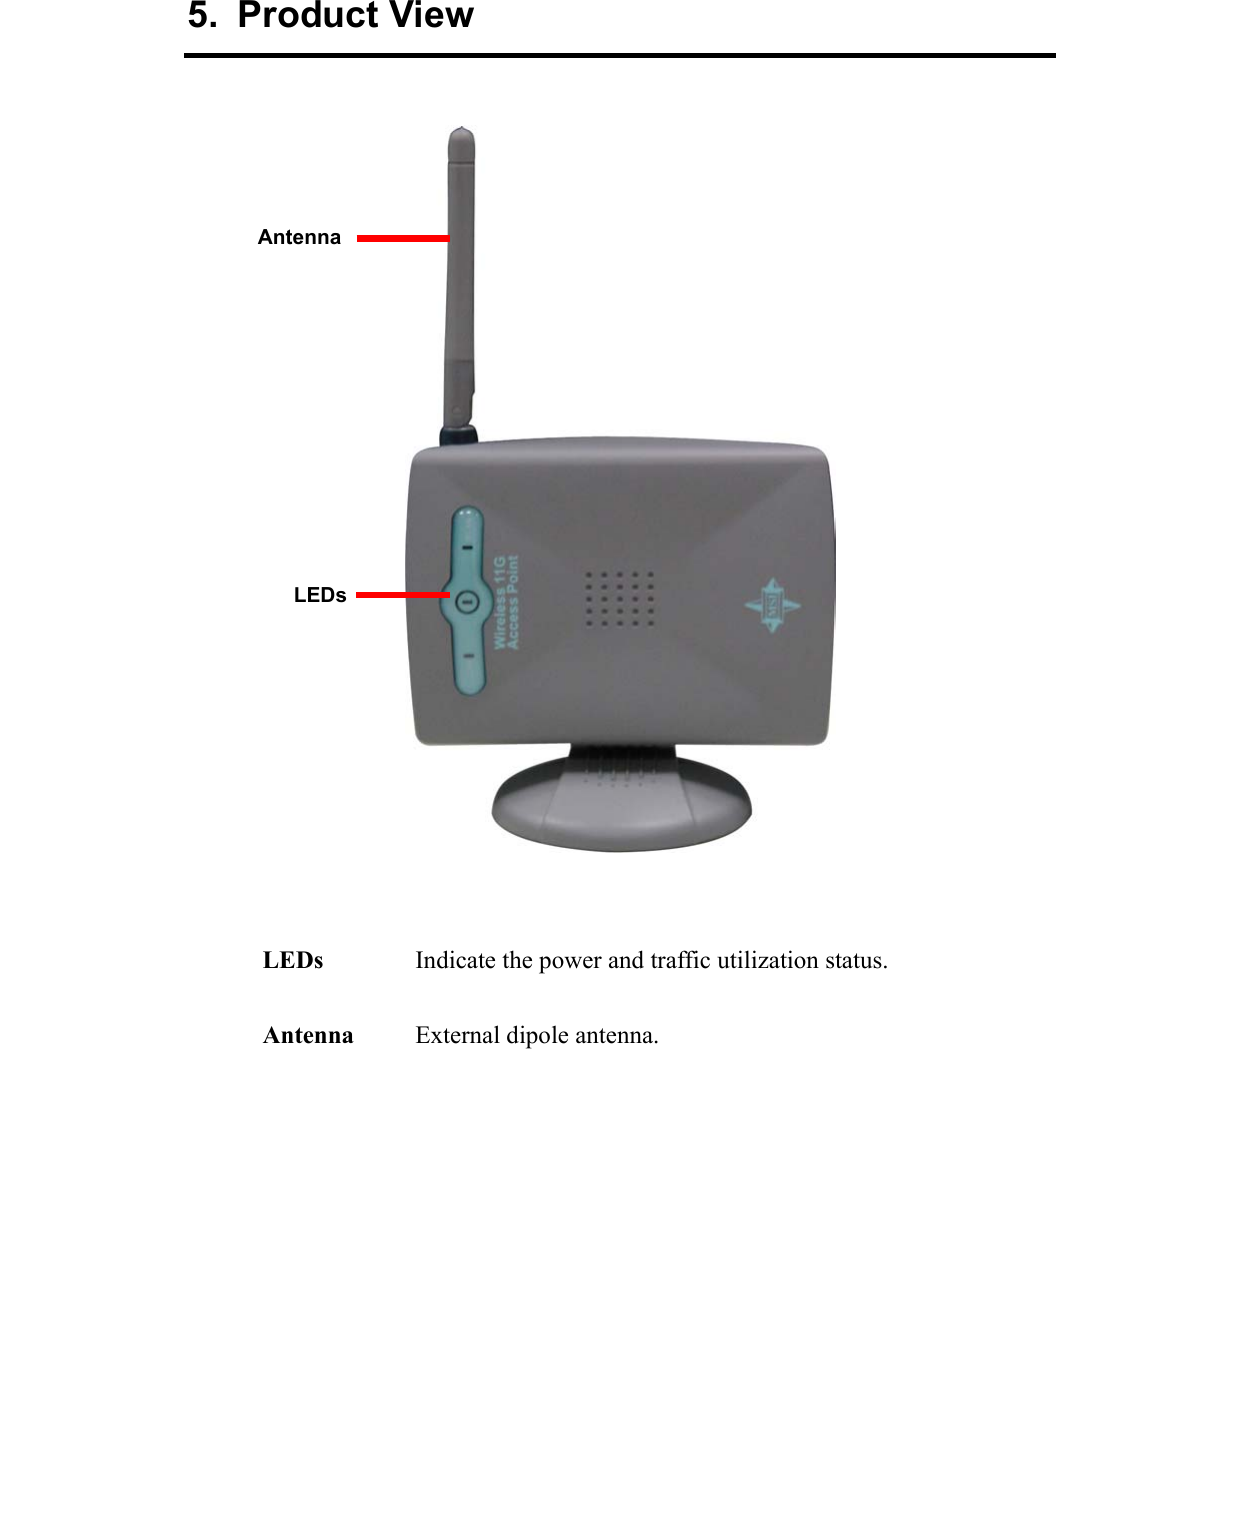 5. Product View     LEDs  Indicate the power and traffic utilization status.  Antenna  External dipole antenna.   LEDs Antenna 